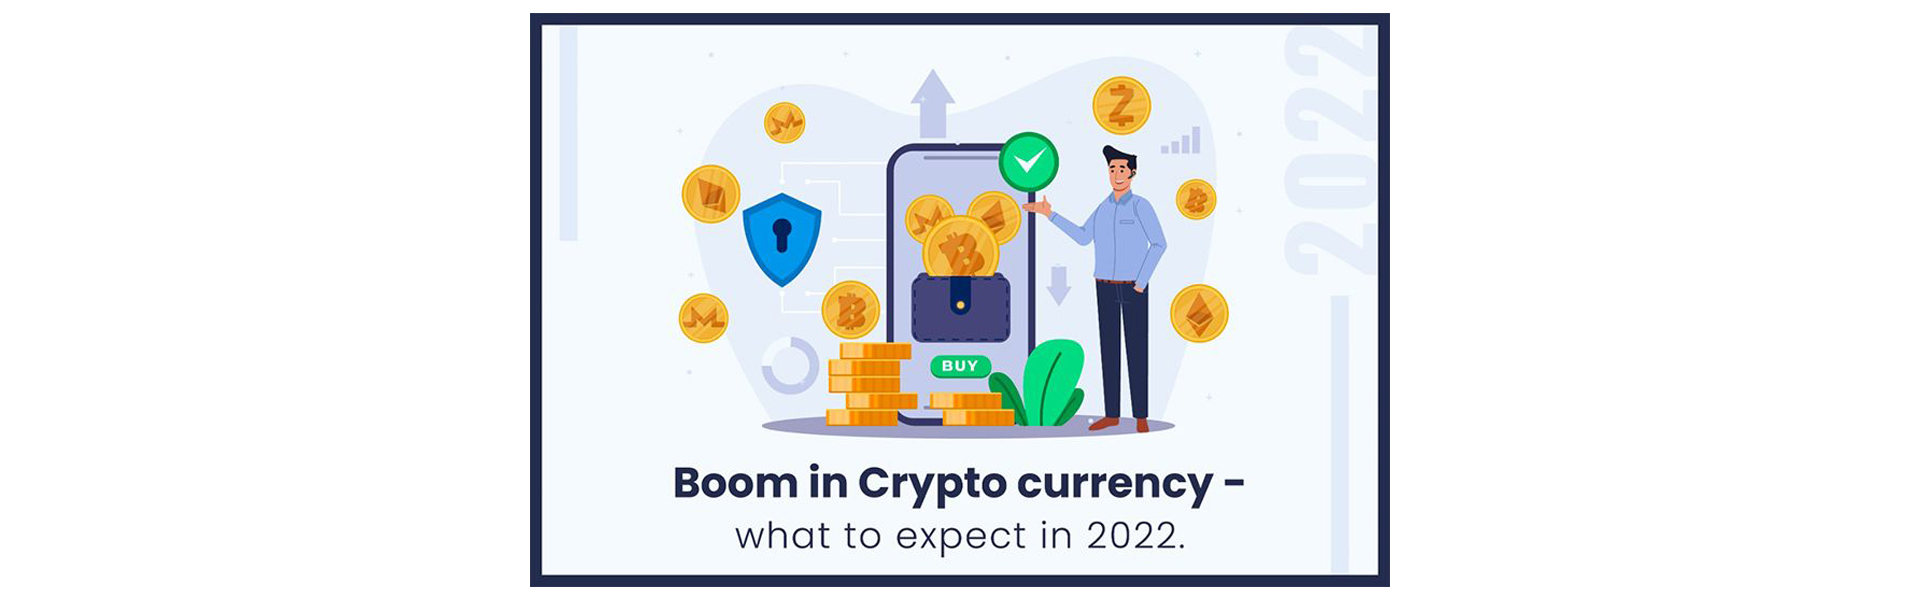 Cryptocurrency Trend � what to expect in 2022